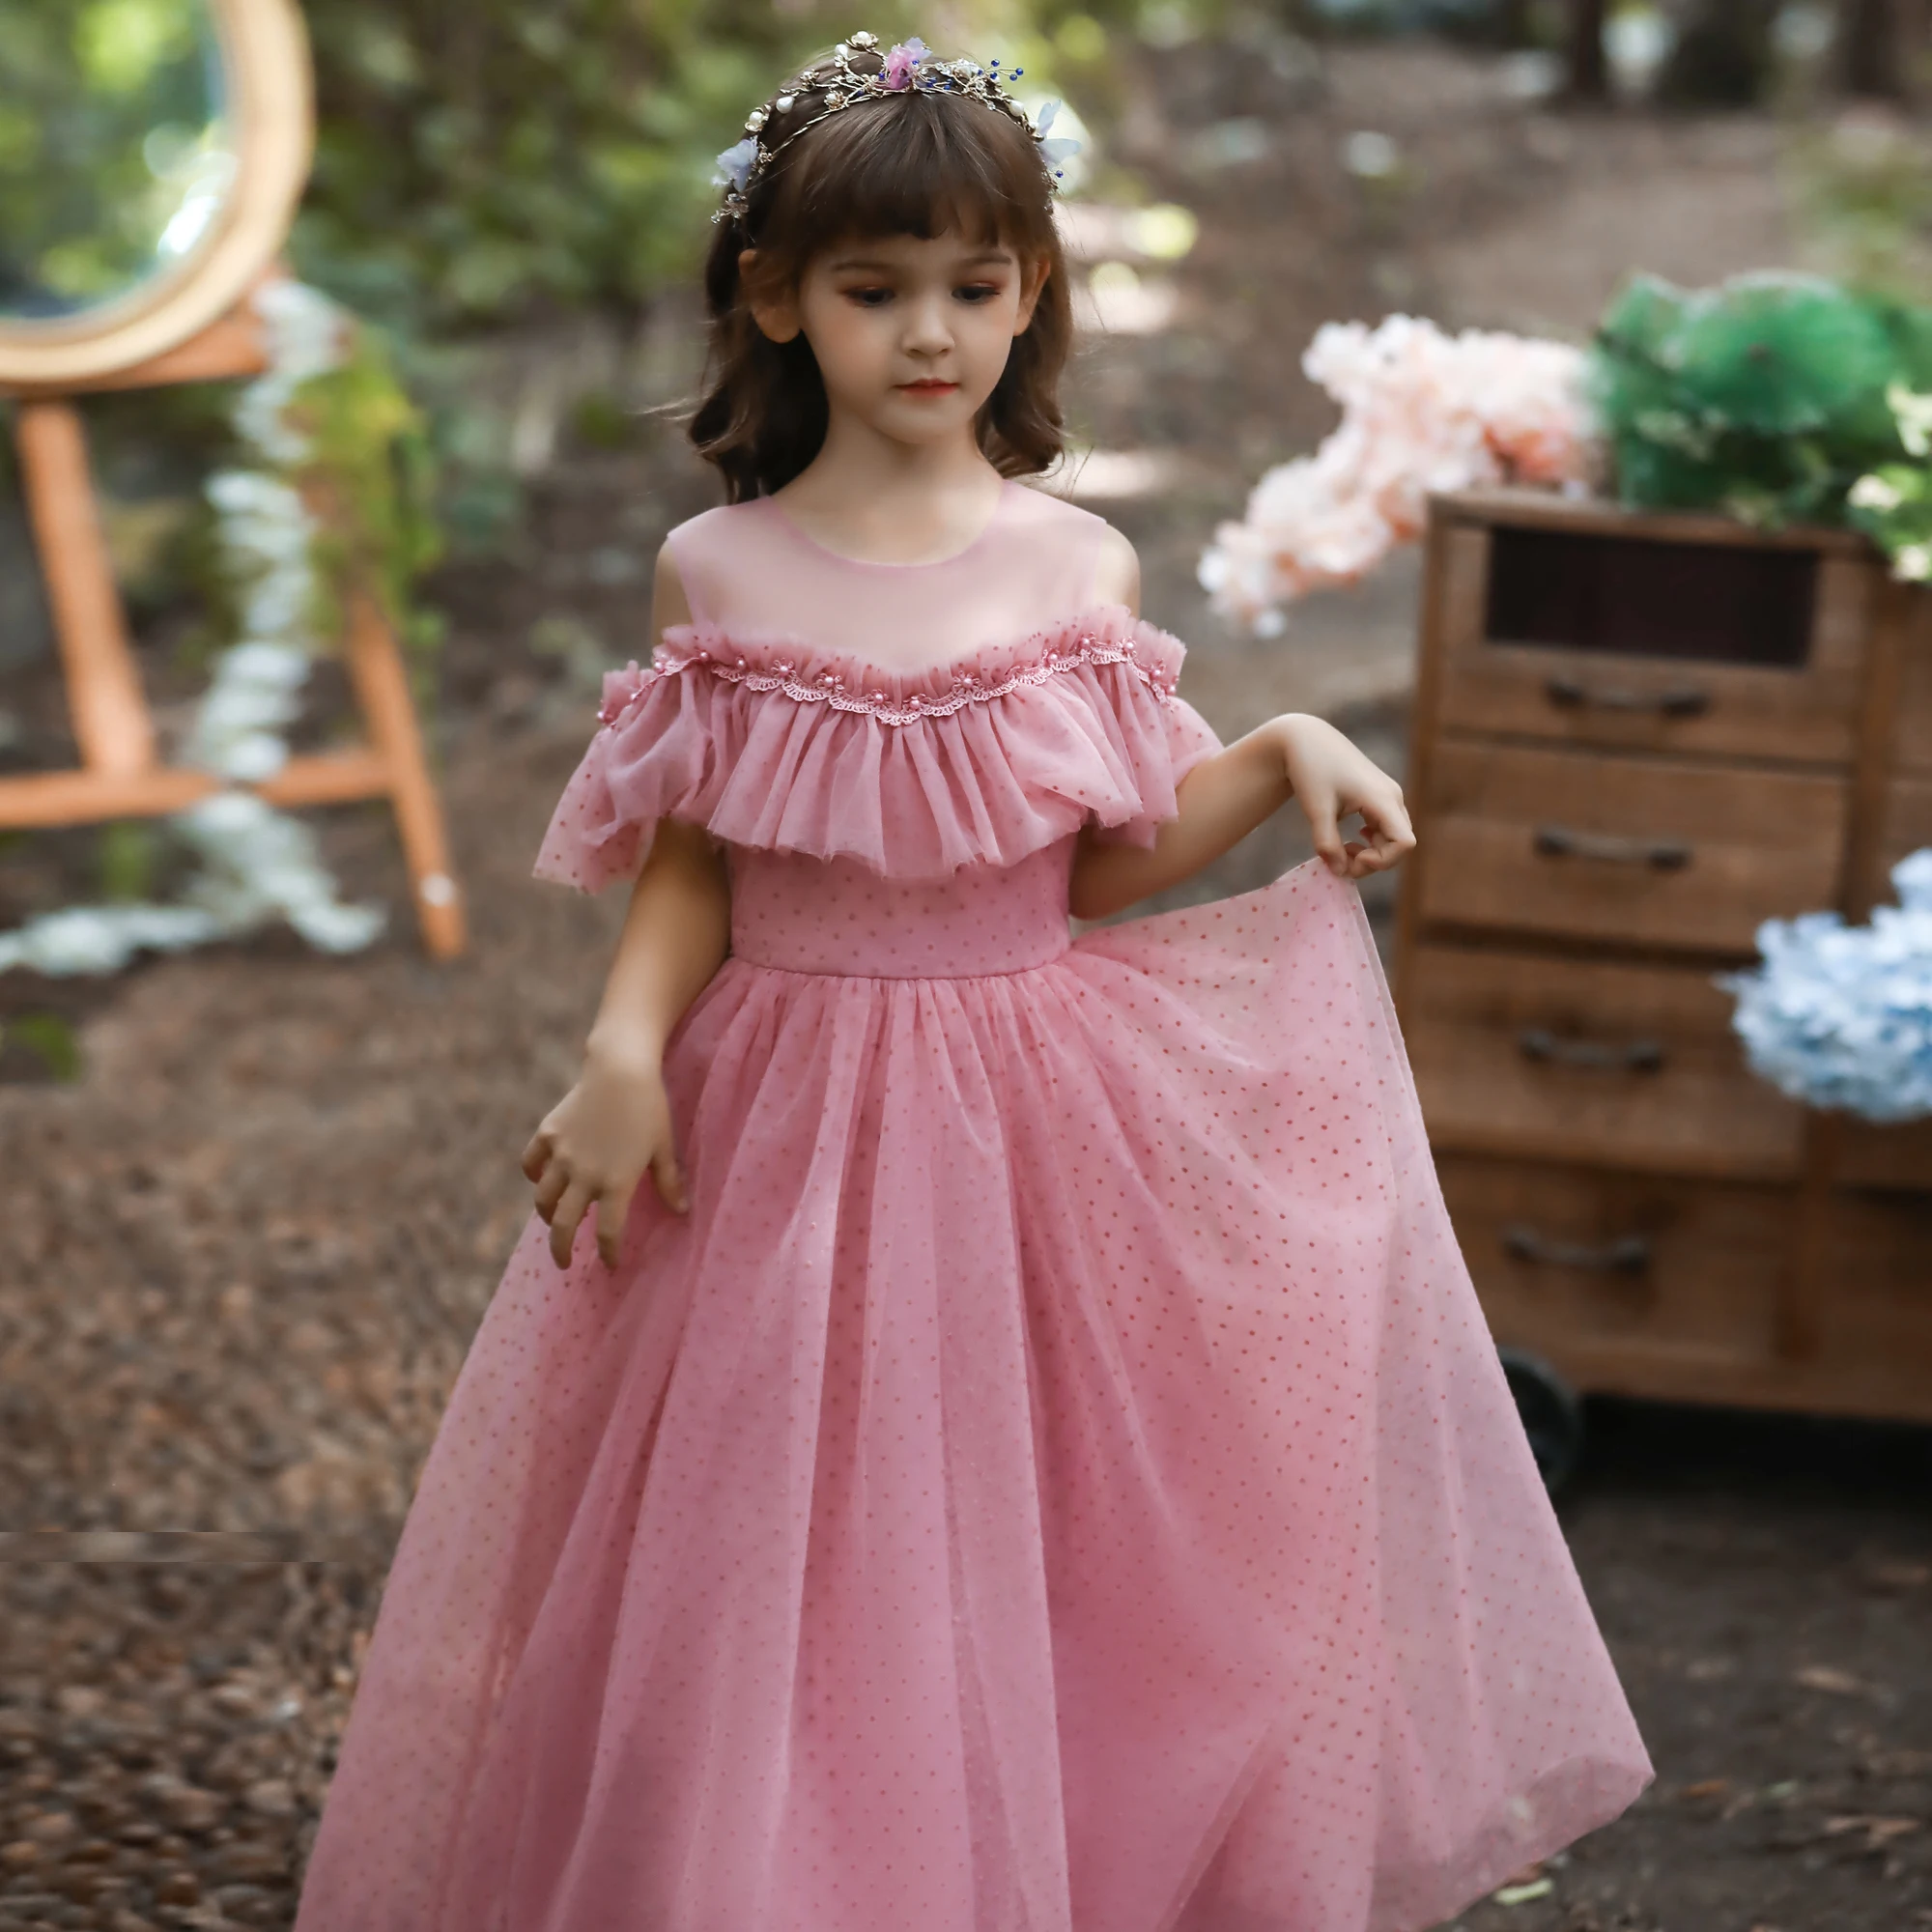 High quality wave dot wedding flower girls dresses embroidered soft mesh girl princess dress for birthday party dress, Bean powder,red,champagne